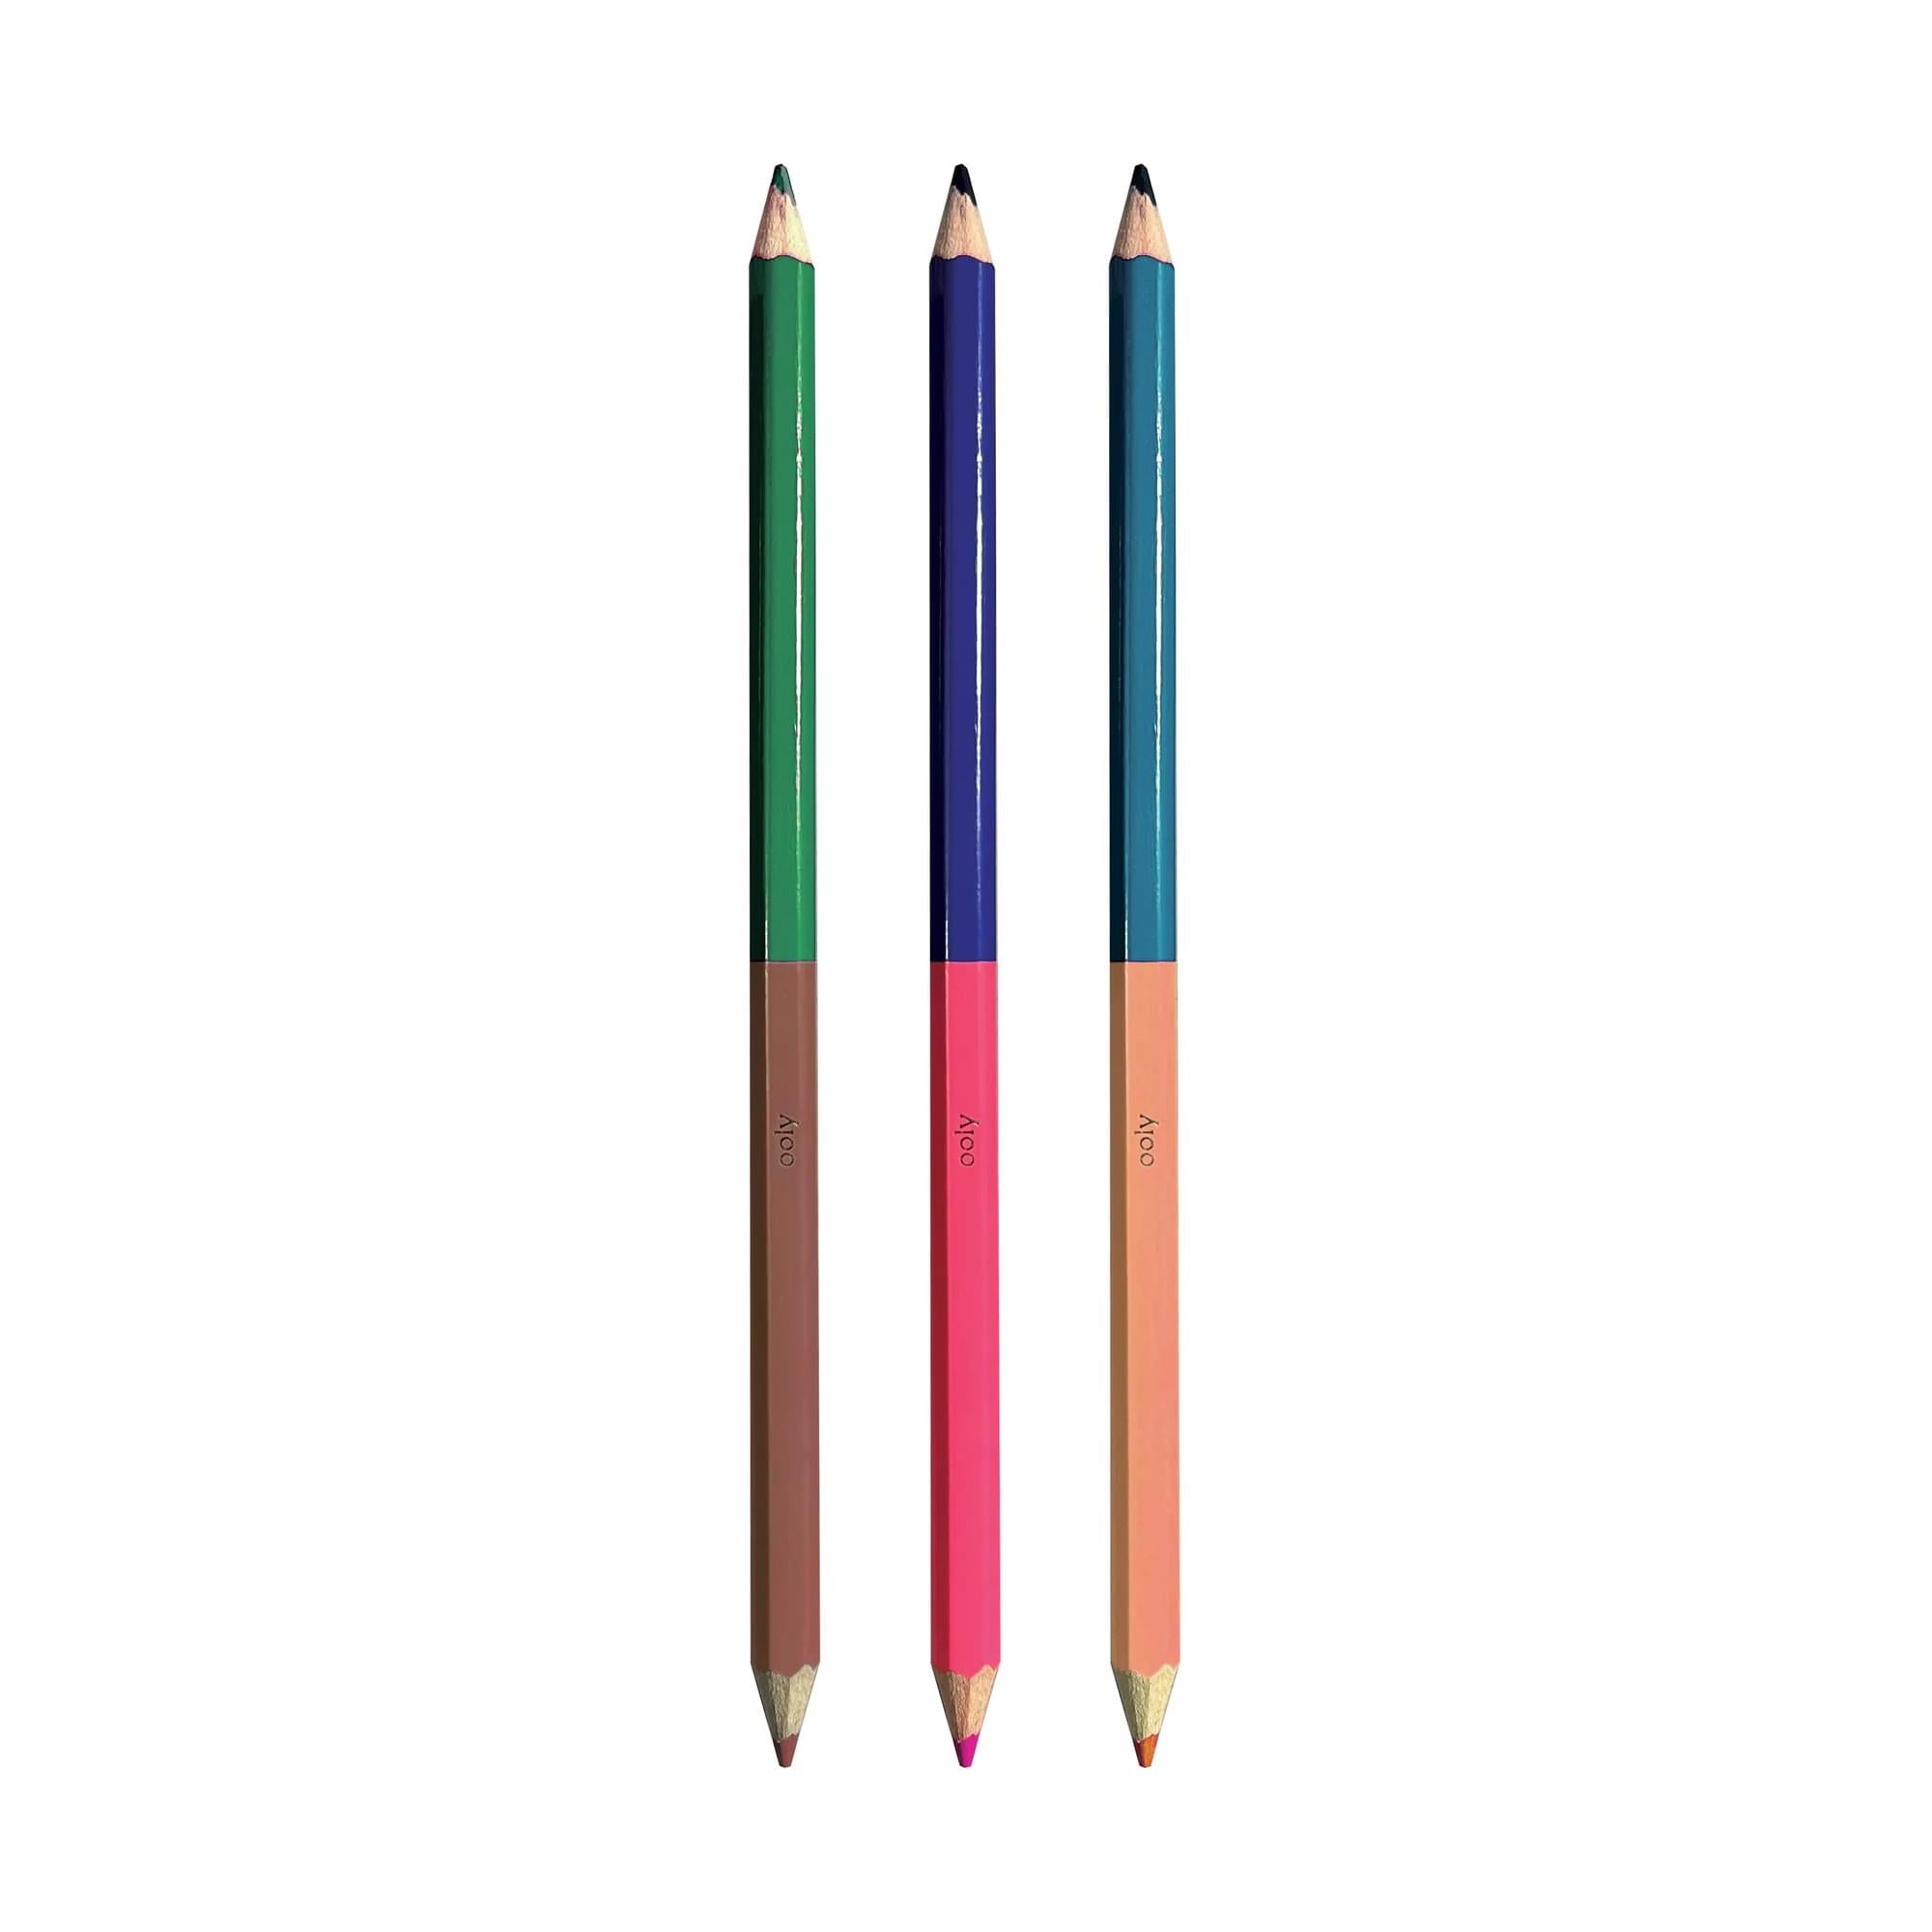 Erasable Color Pencil Set, 3.3 mm, 2B, Assorted Lead and Barrel Colors,  24/Pack - BOSS Office and Computer Products